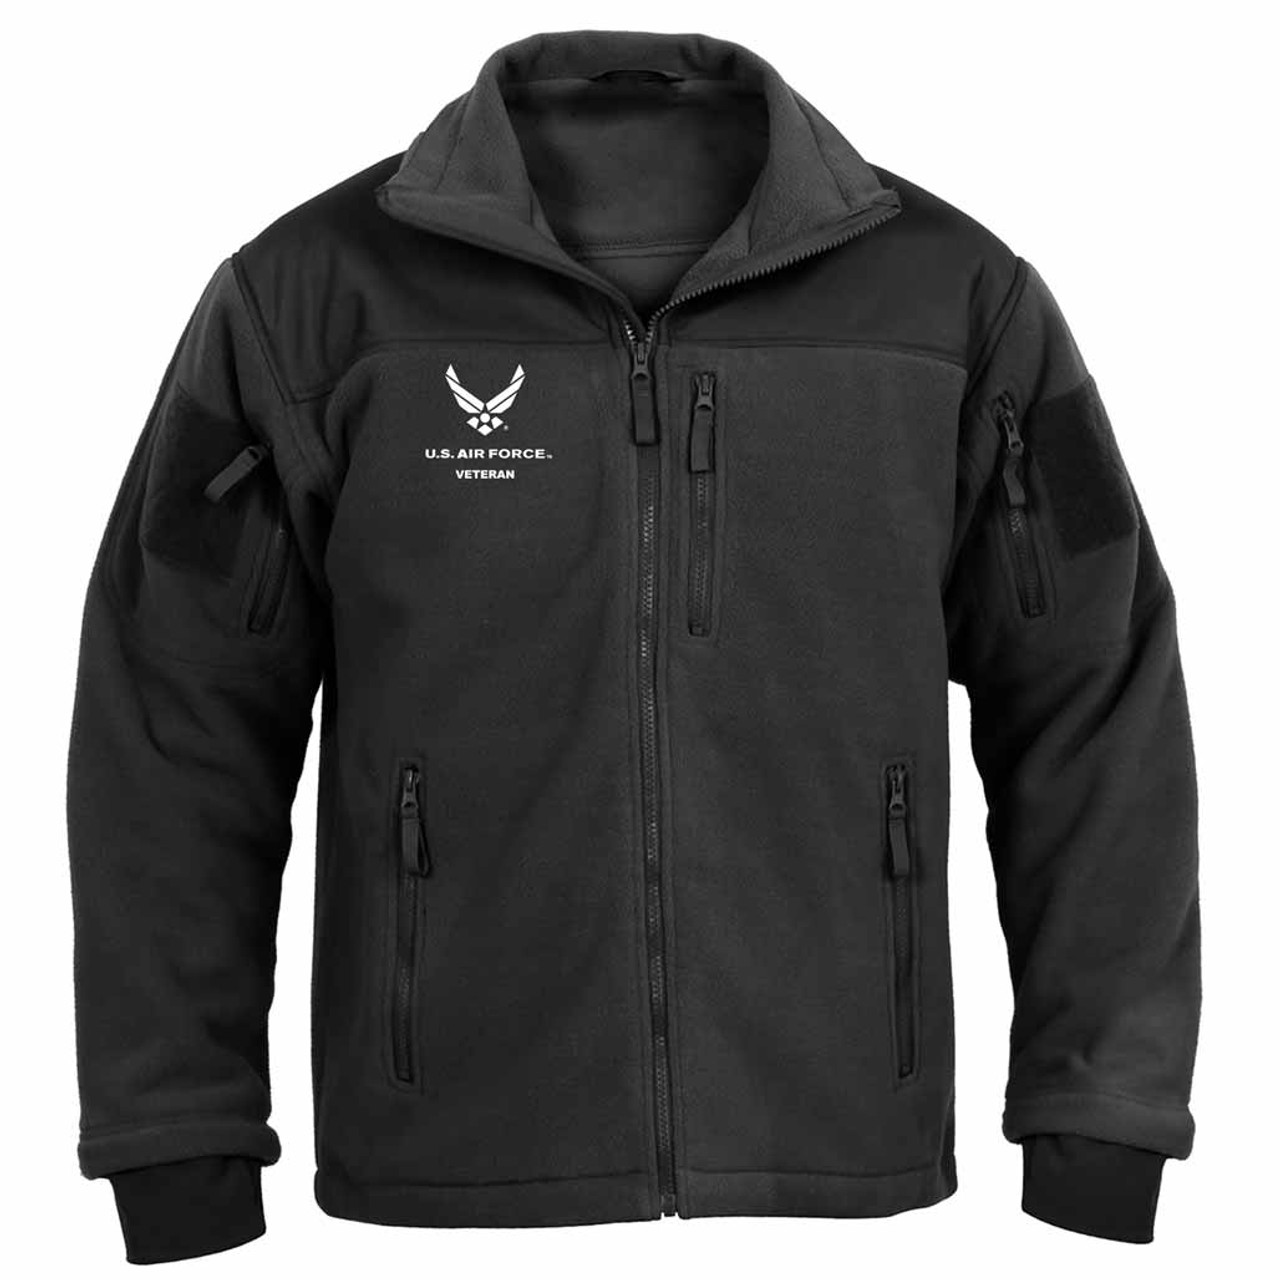 U.S. Air Force Special Ops Tactical Fleece Jacket with Hap Arnold Logo and USAF Veteran text: black jacket with white embroidery